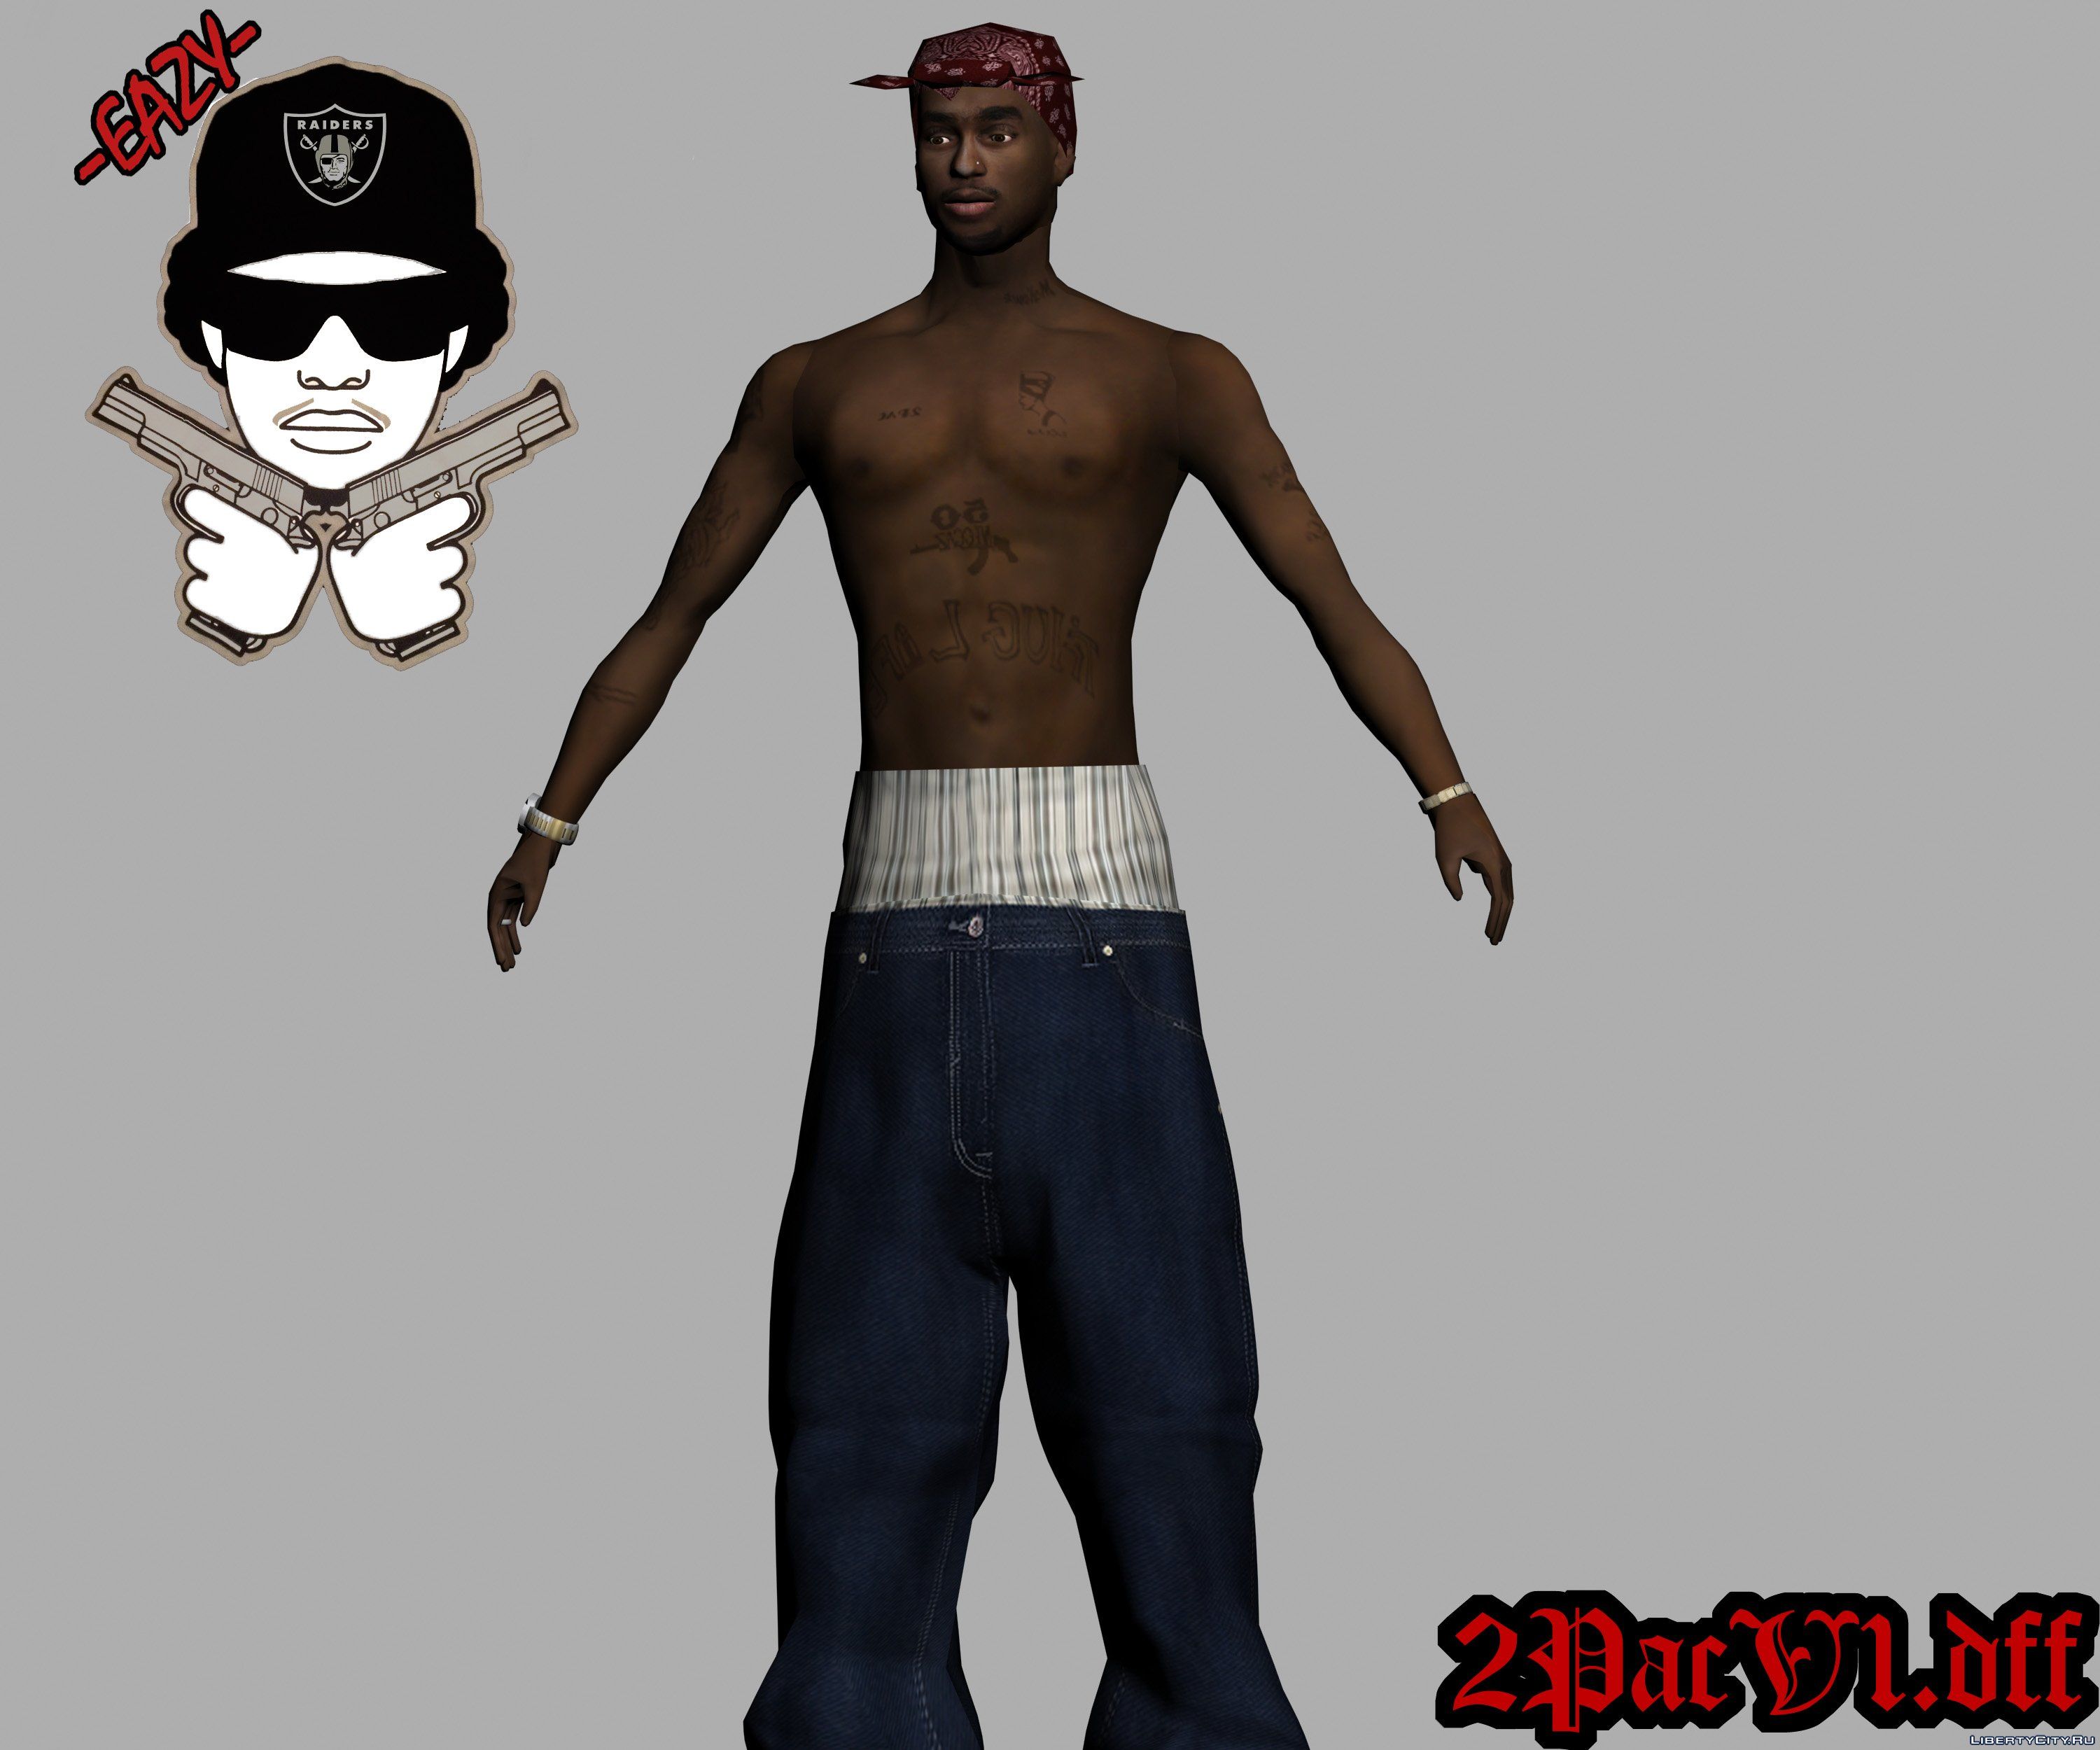 Files To Replace 2pacdff In Gta San Andreas 5 Files